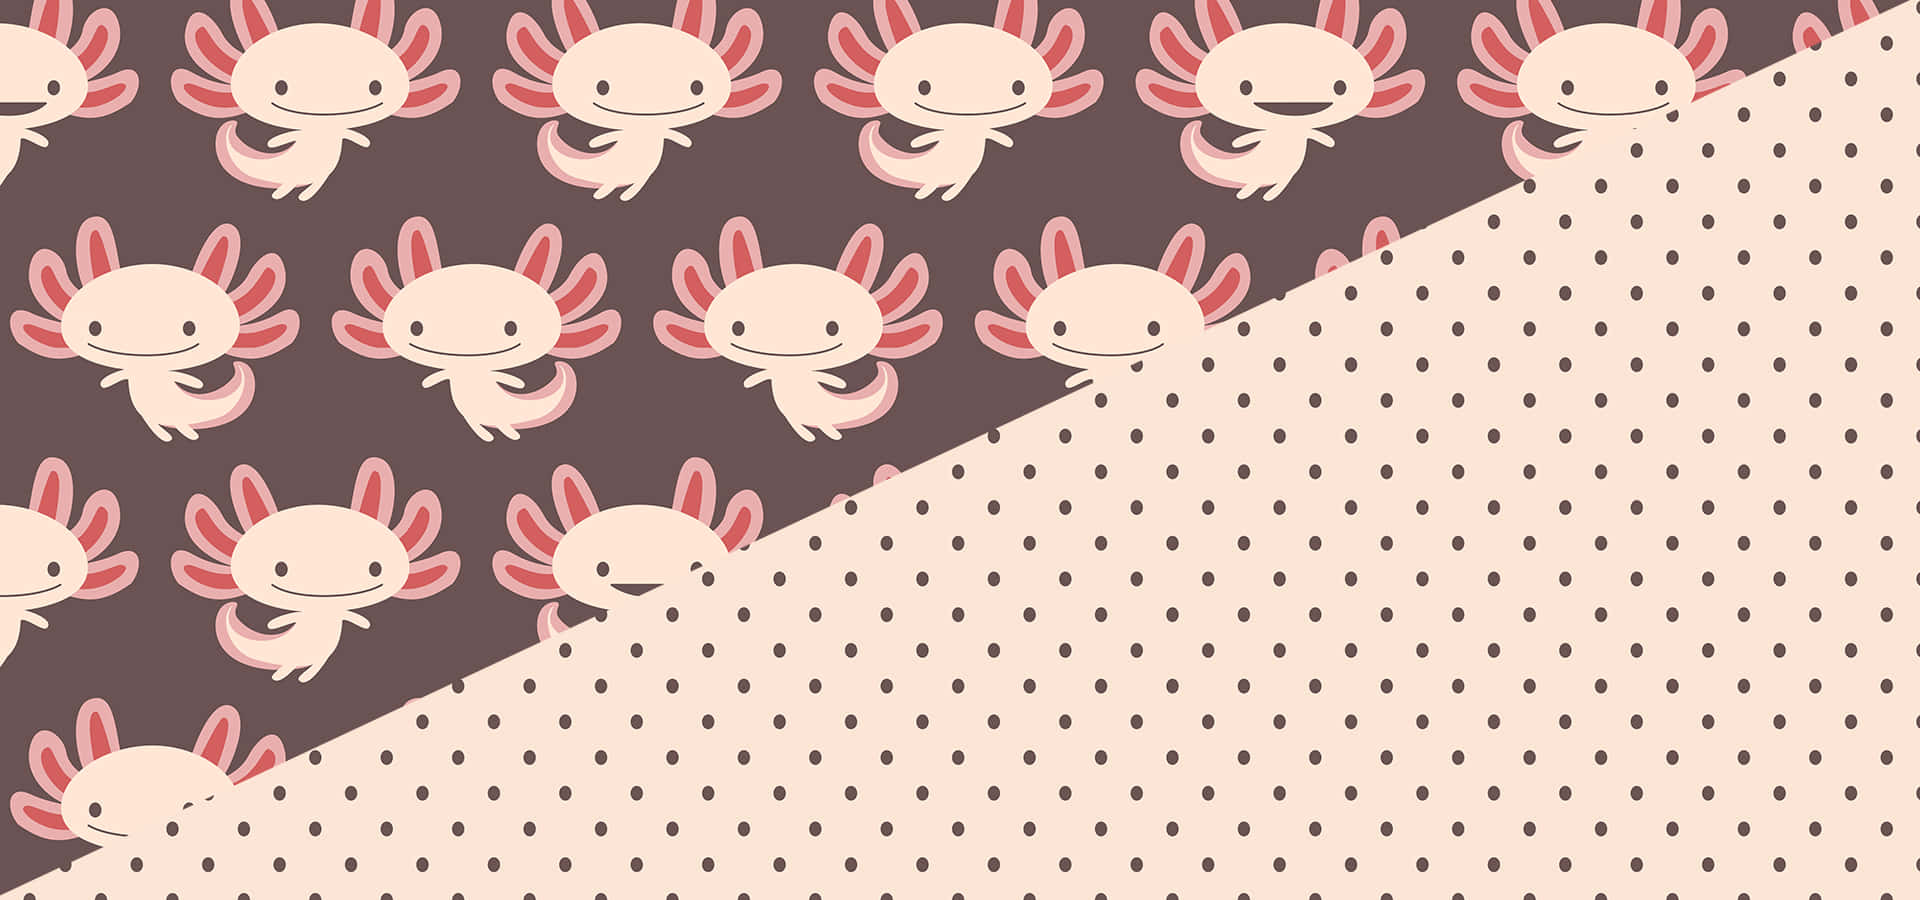 A Cute Paper With A Cute Pattern Of Little Animals